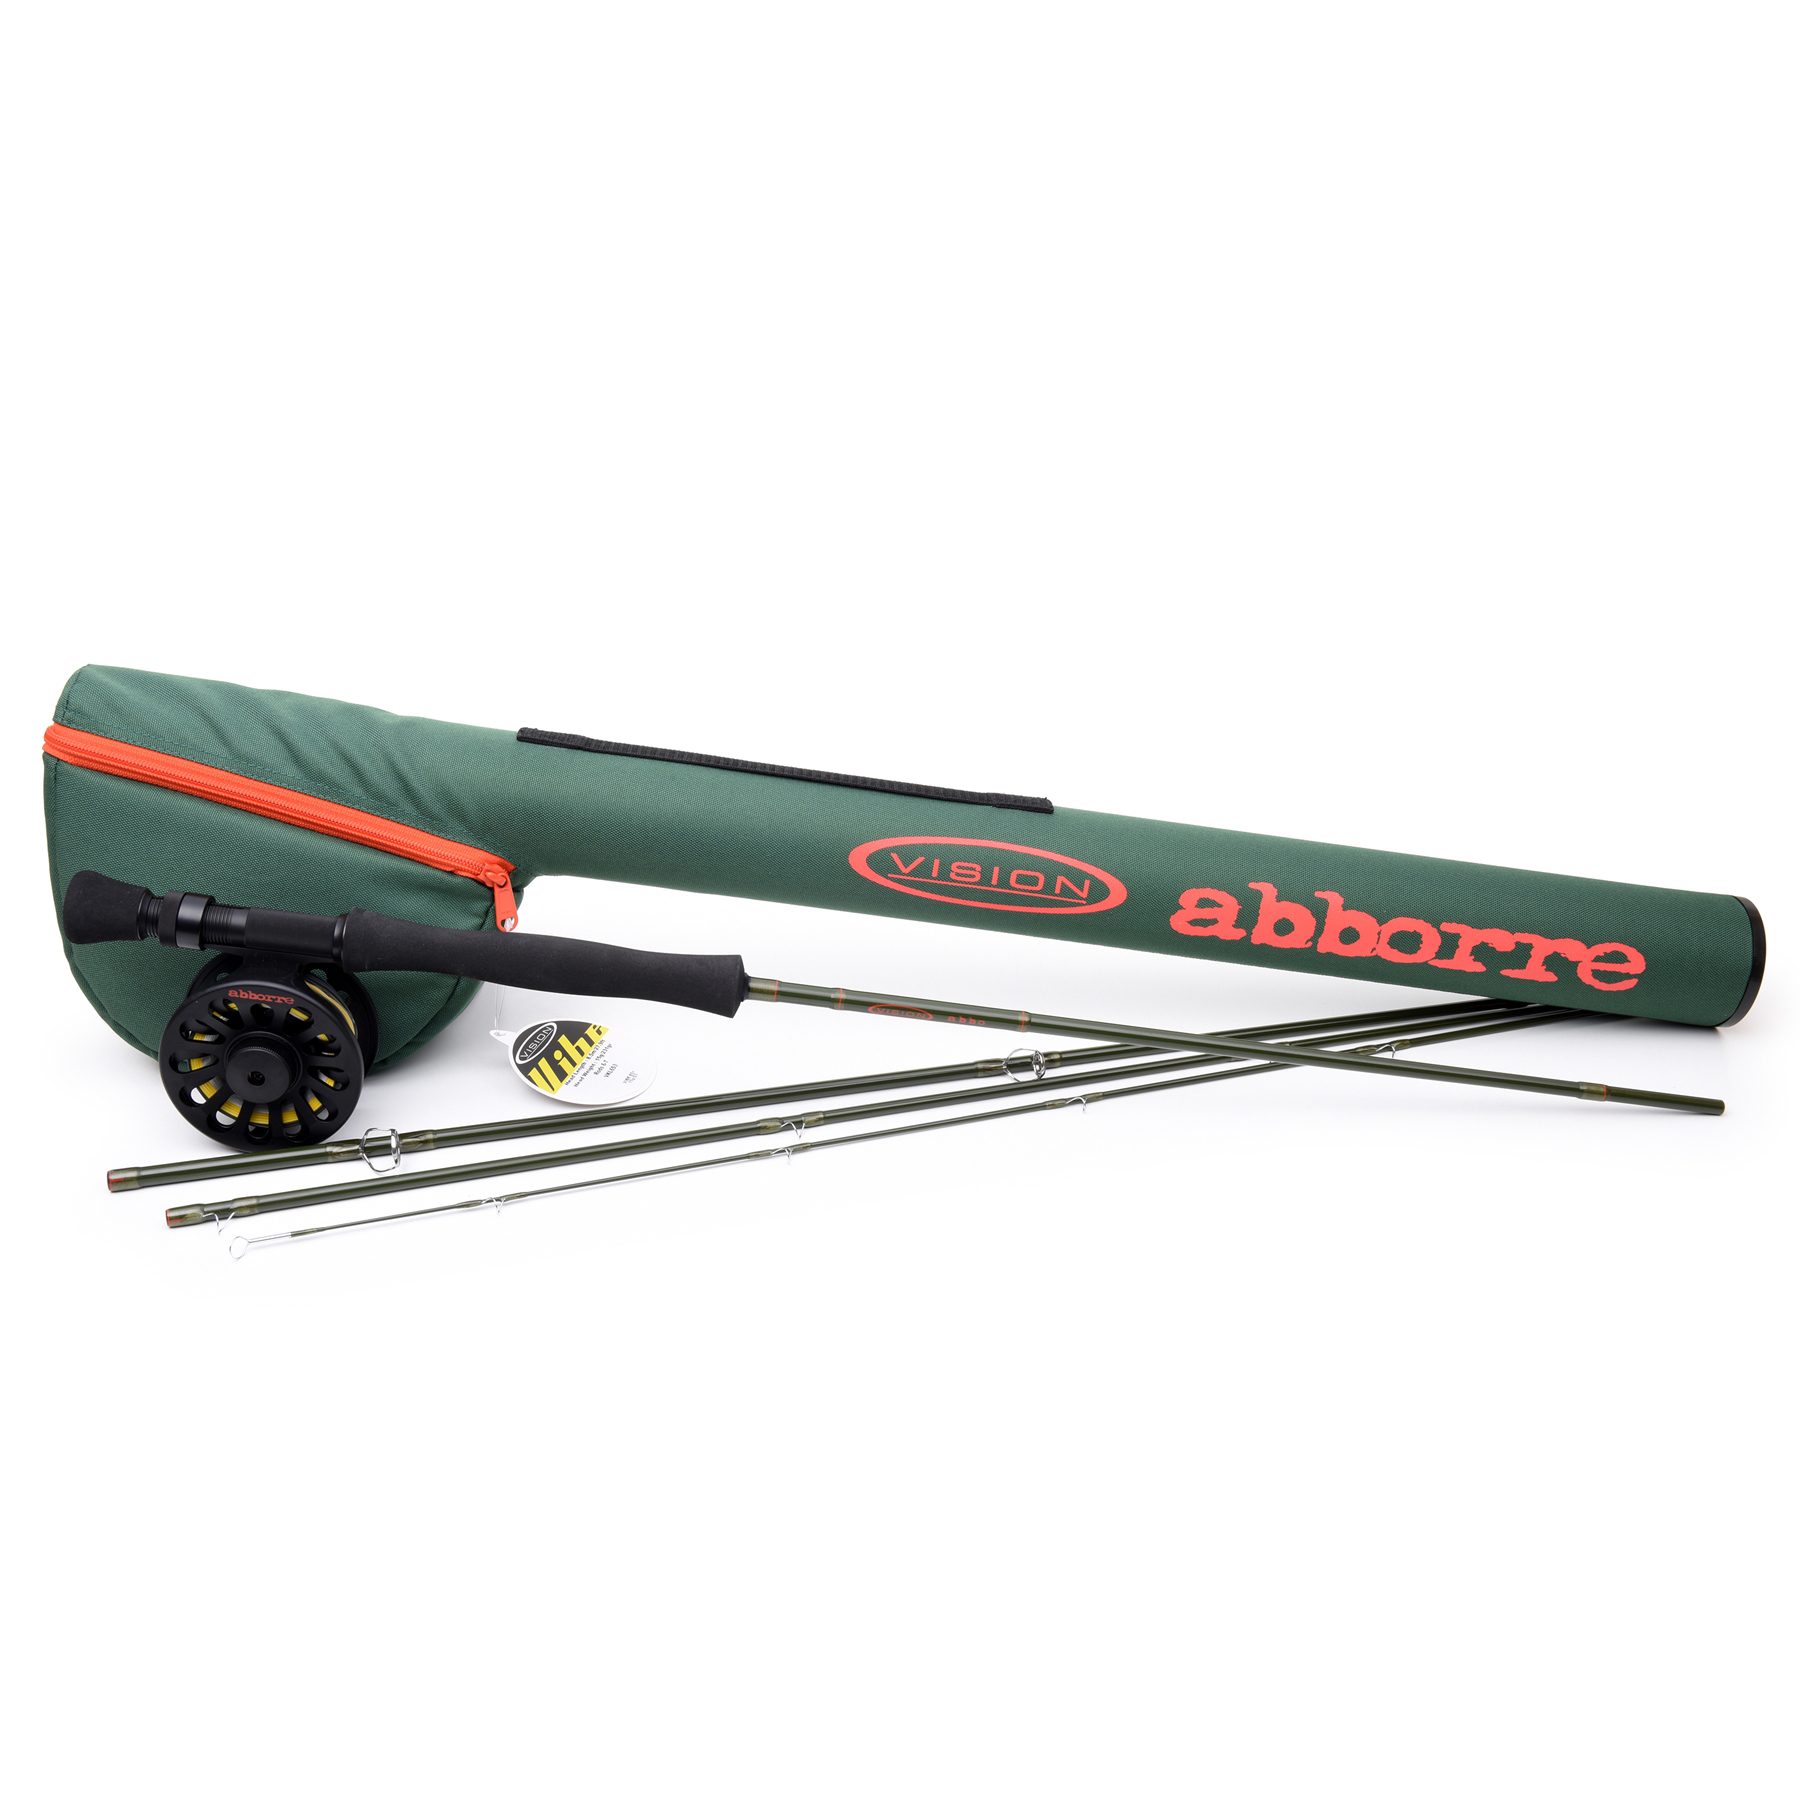 Vision Outfit Abborre Fly Kit 9 foot #6